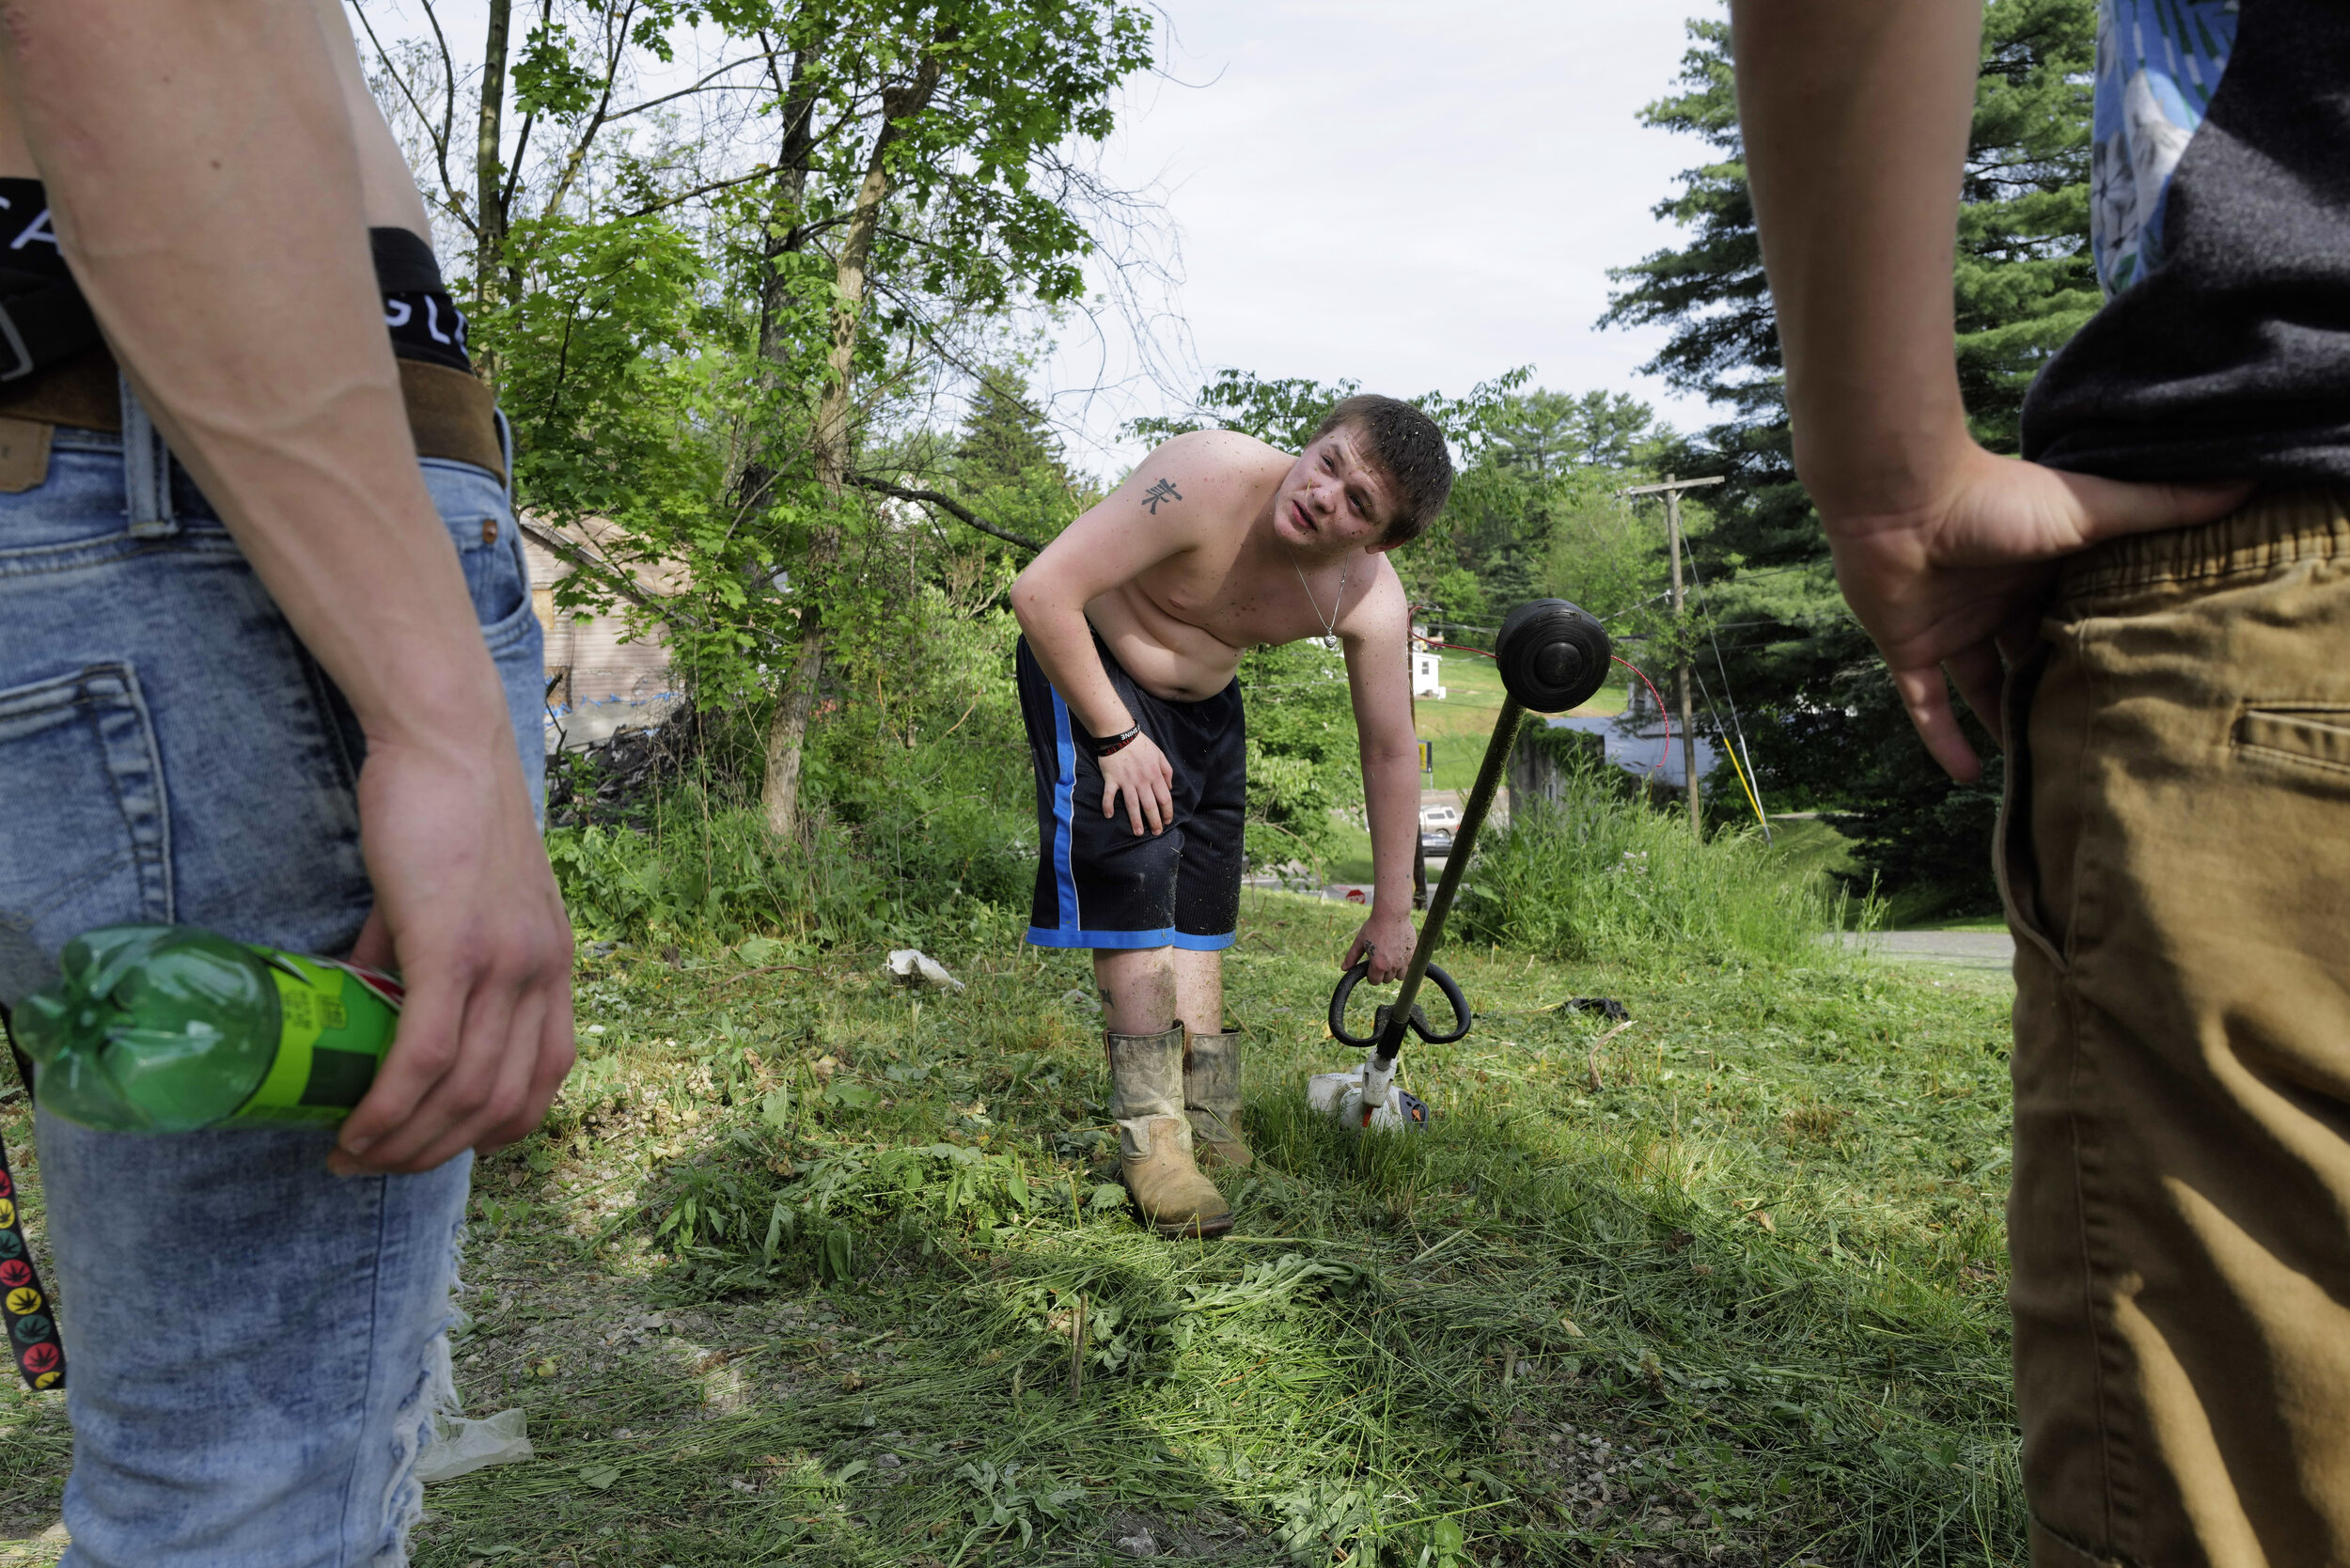  Reuben cuts the lawn on one of Ben’s properties in New Straitsville, Ohio, to earn his keep while friends come up to check on him on May 21, 2021. “I know if my dad was here now, he'd be disappointed, but I know he'd be proud of me at this point in 